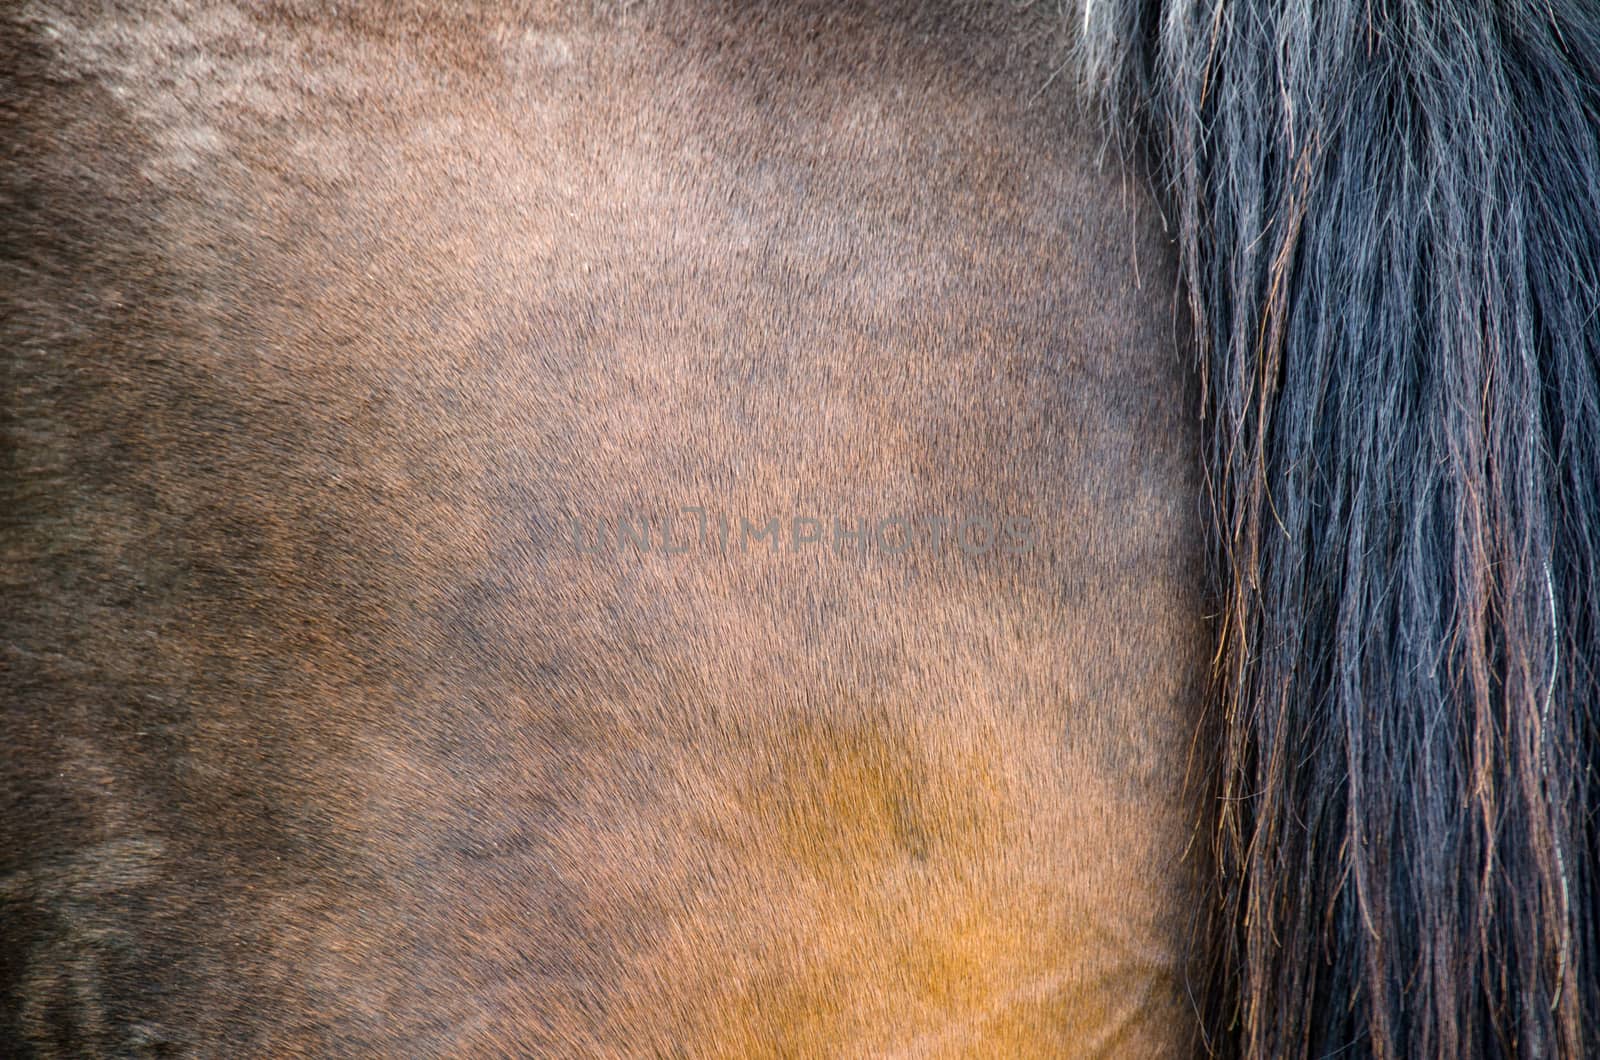 Texture of horse coat with black tail